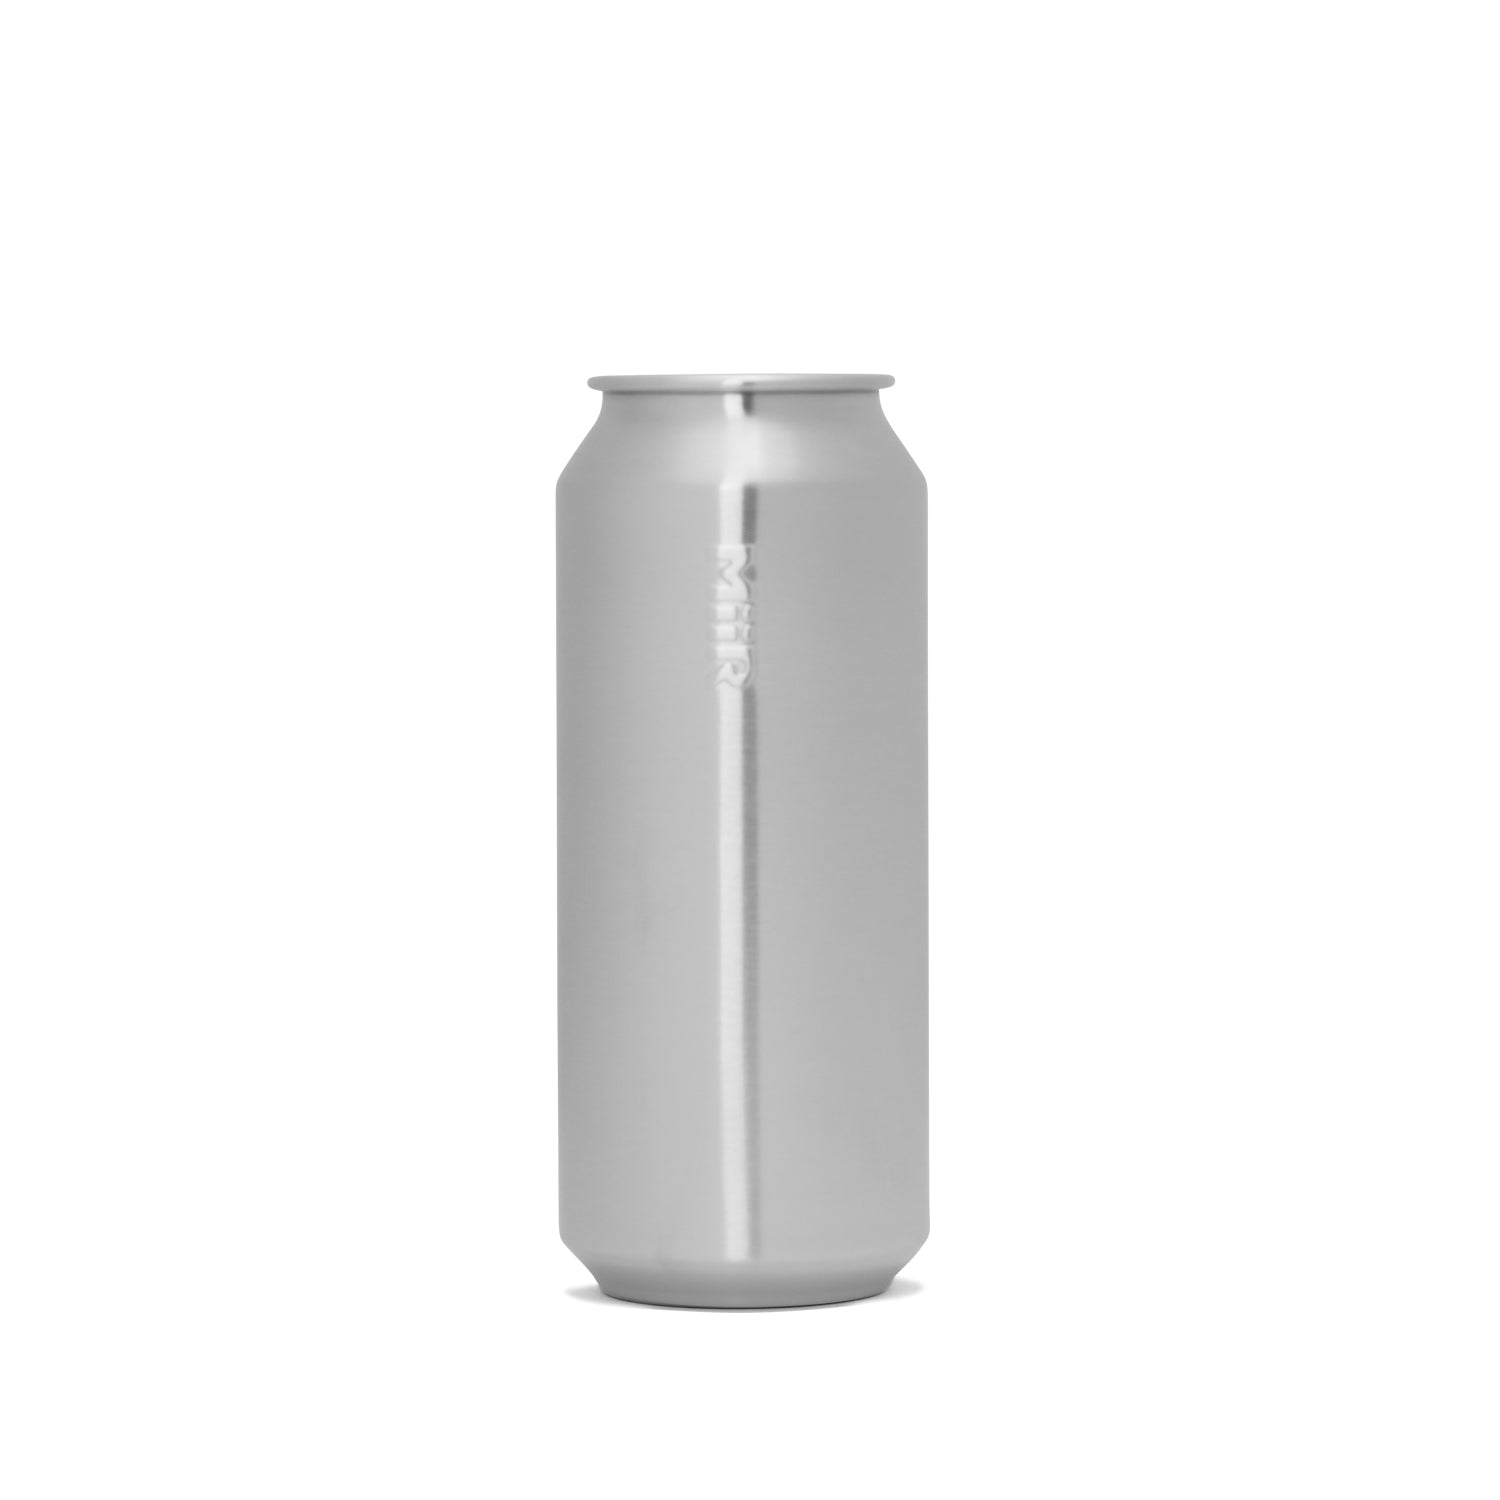 Tall Boy 16 oz. Can Cooler Wholesale Blank - Qty: 50